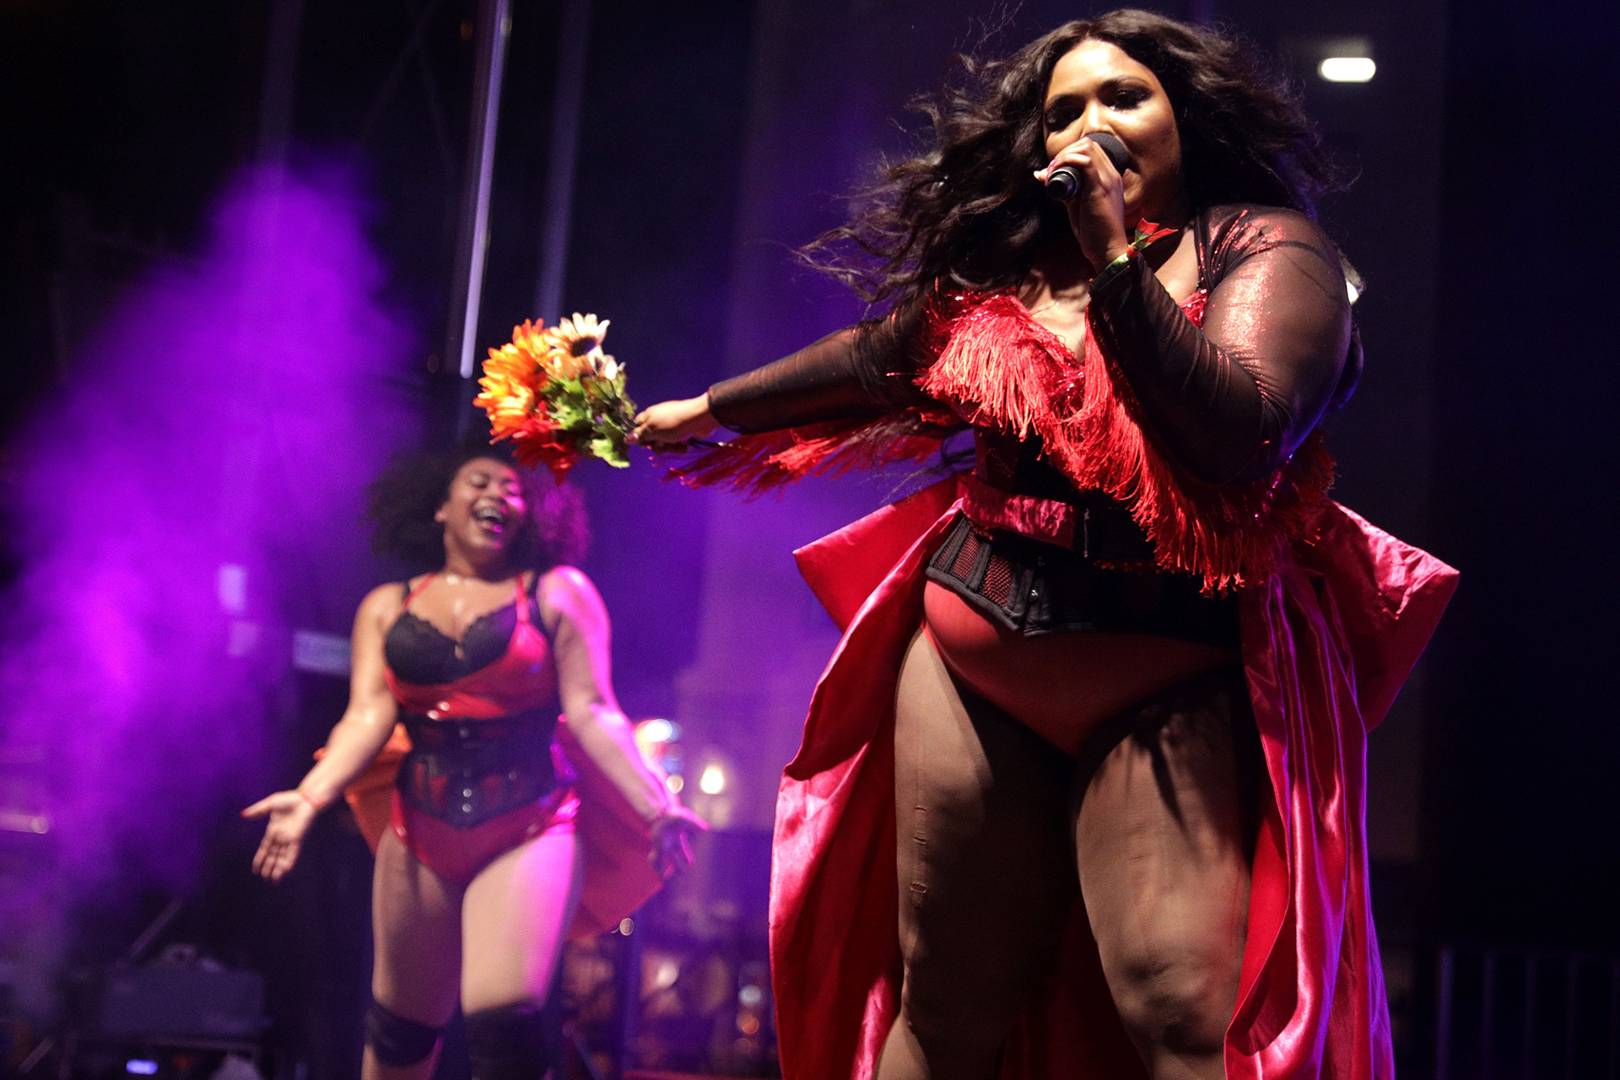 Lizzo's Juice is already the best song of 2019